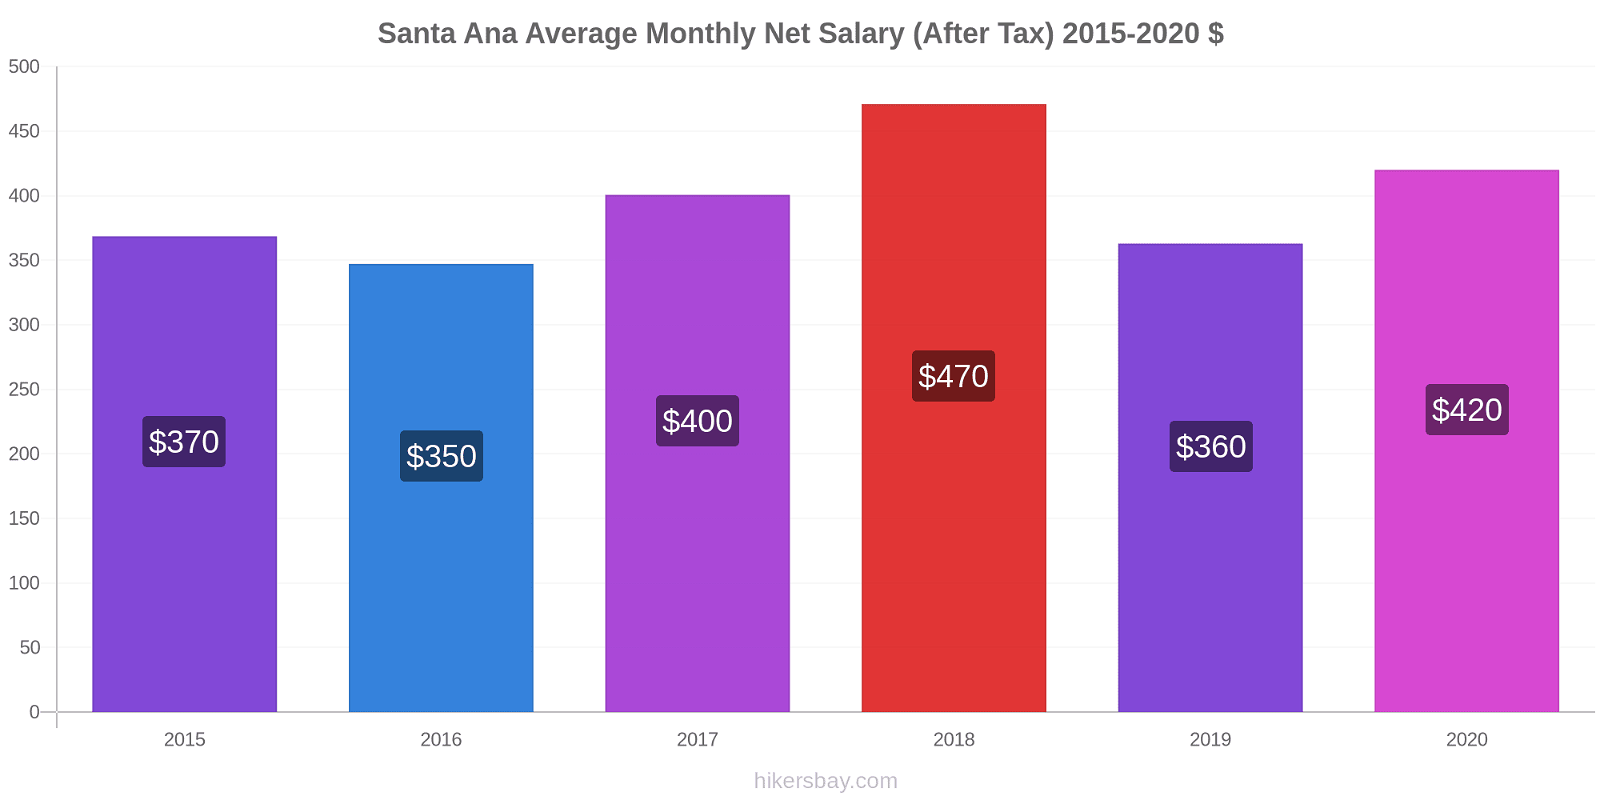 Santa Ana price changes Average Monthly Net Salary (After Tax) hikersbay.com